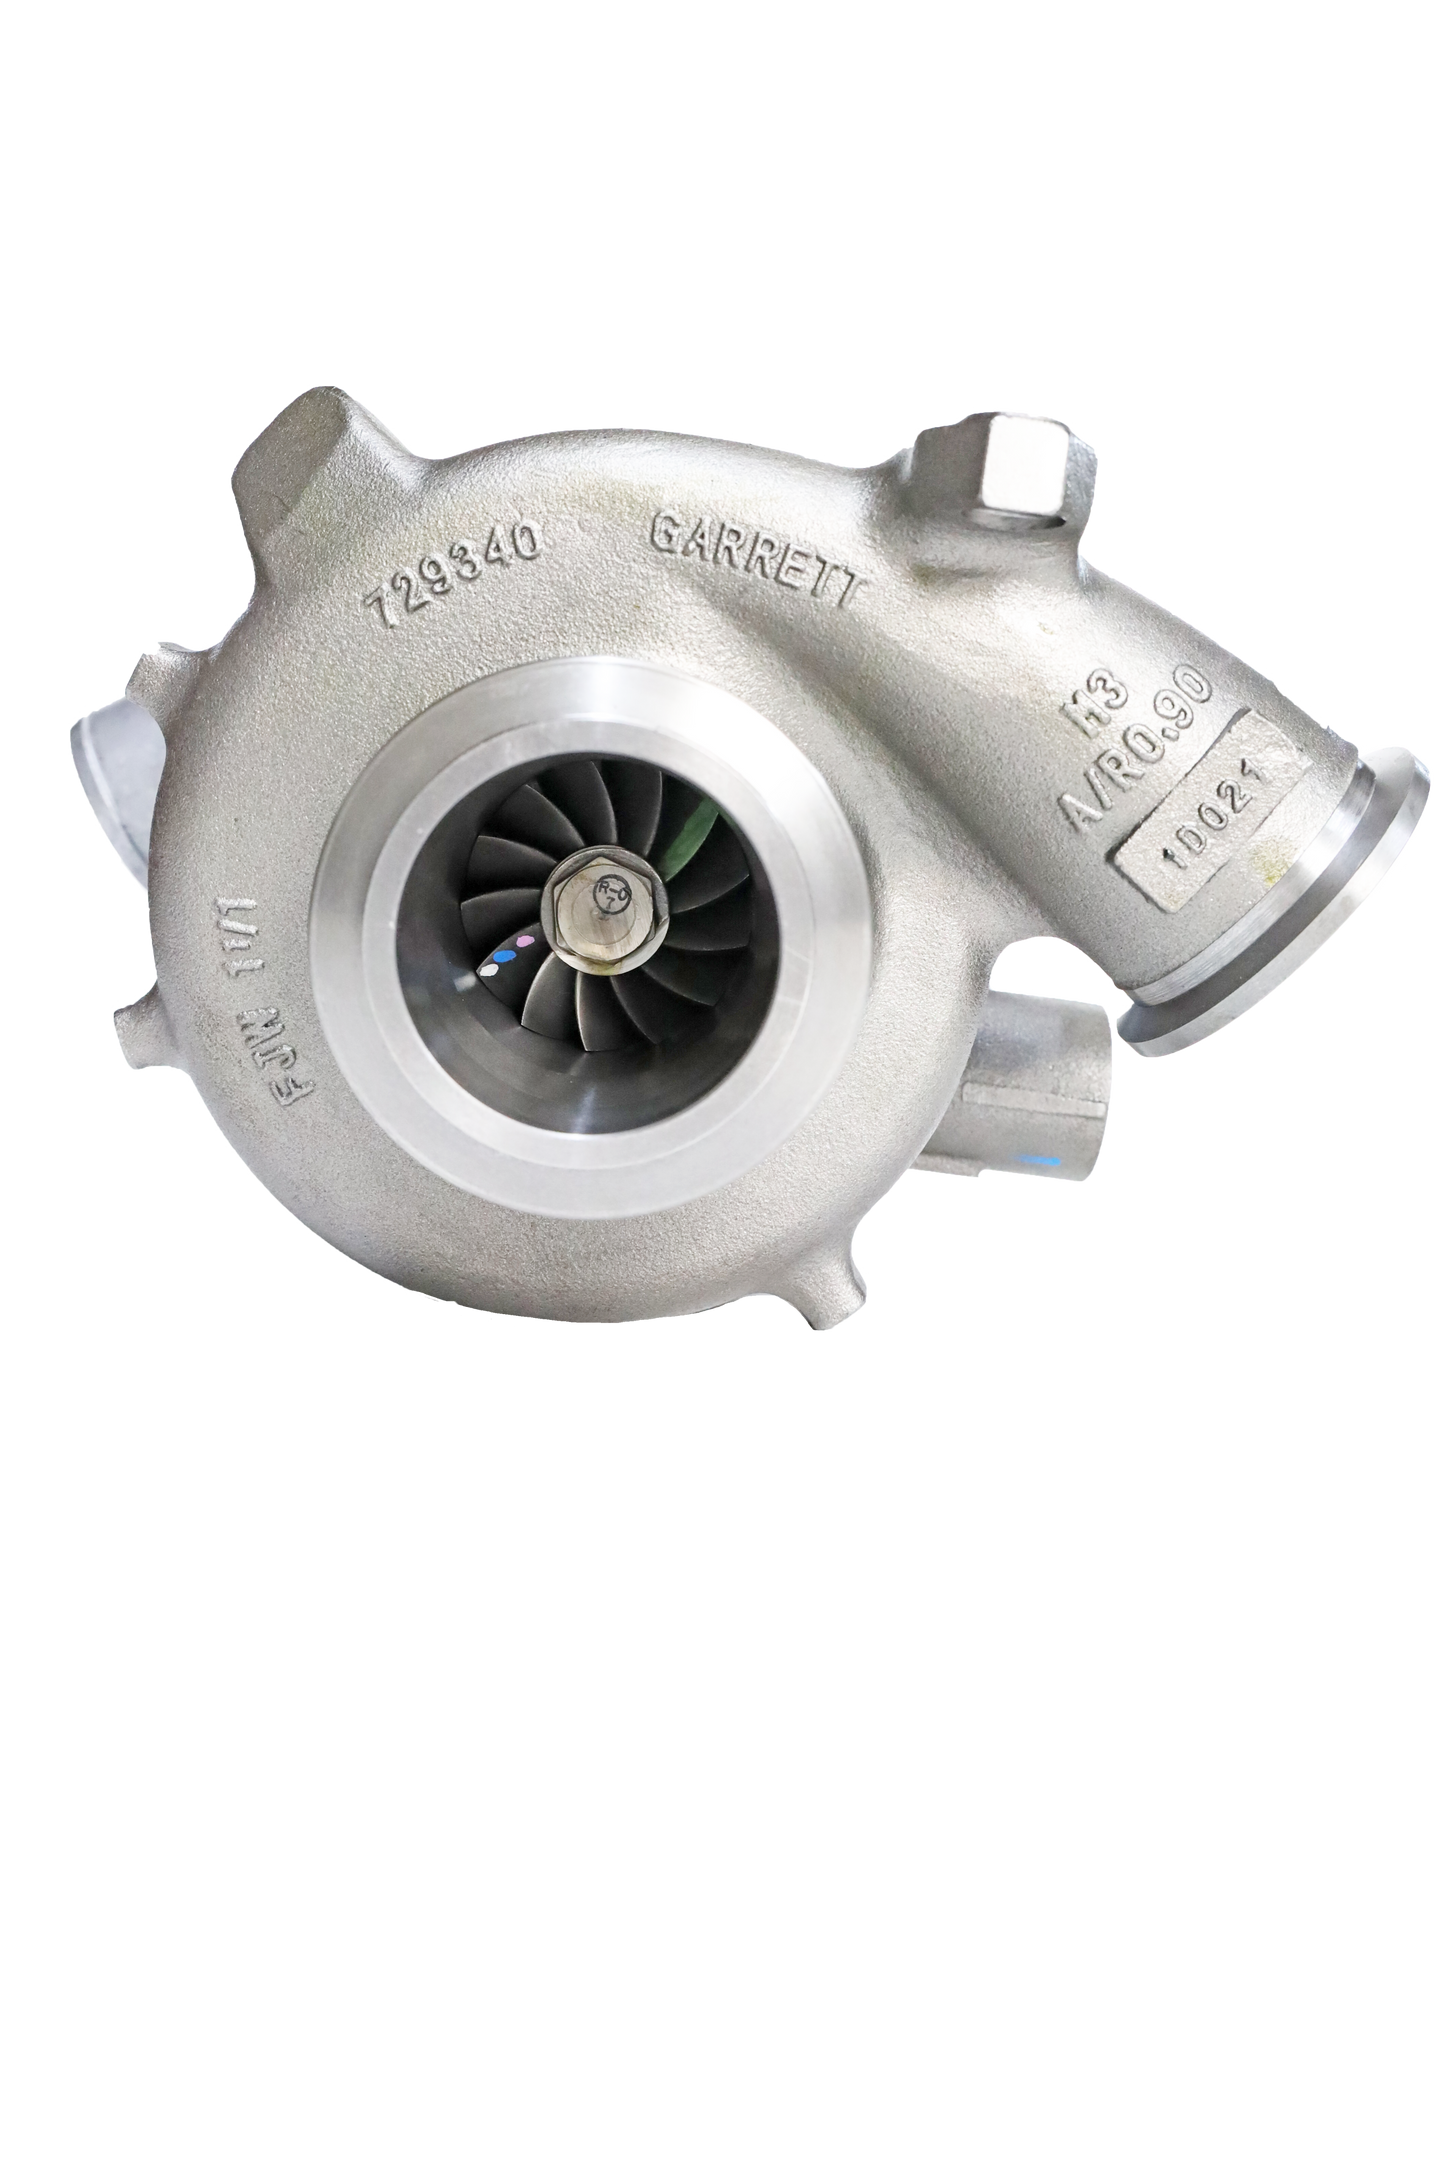 702011-0011 GTP38 Ford 7.3L Turbo Remanufactured Turbocharger